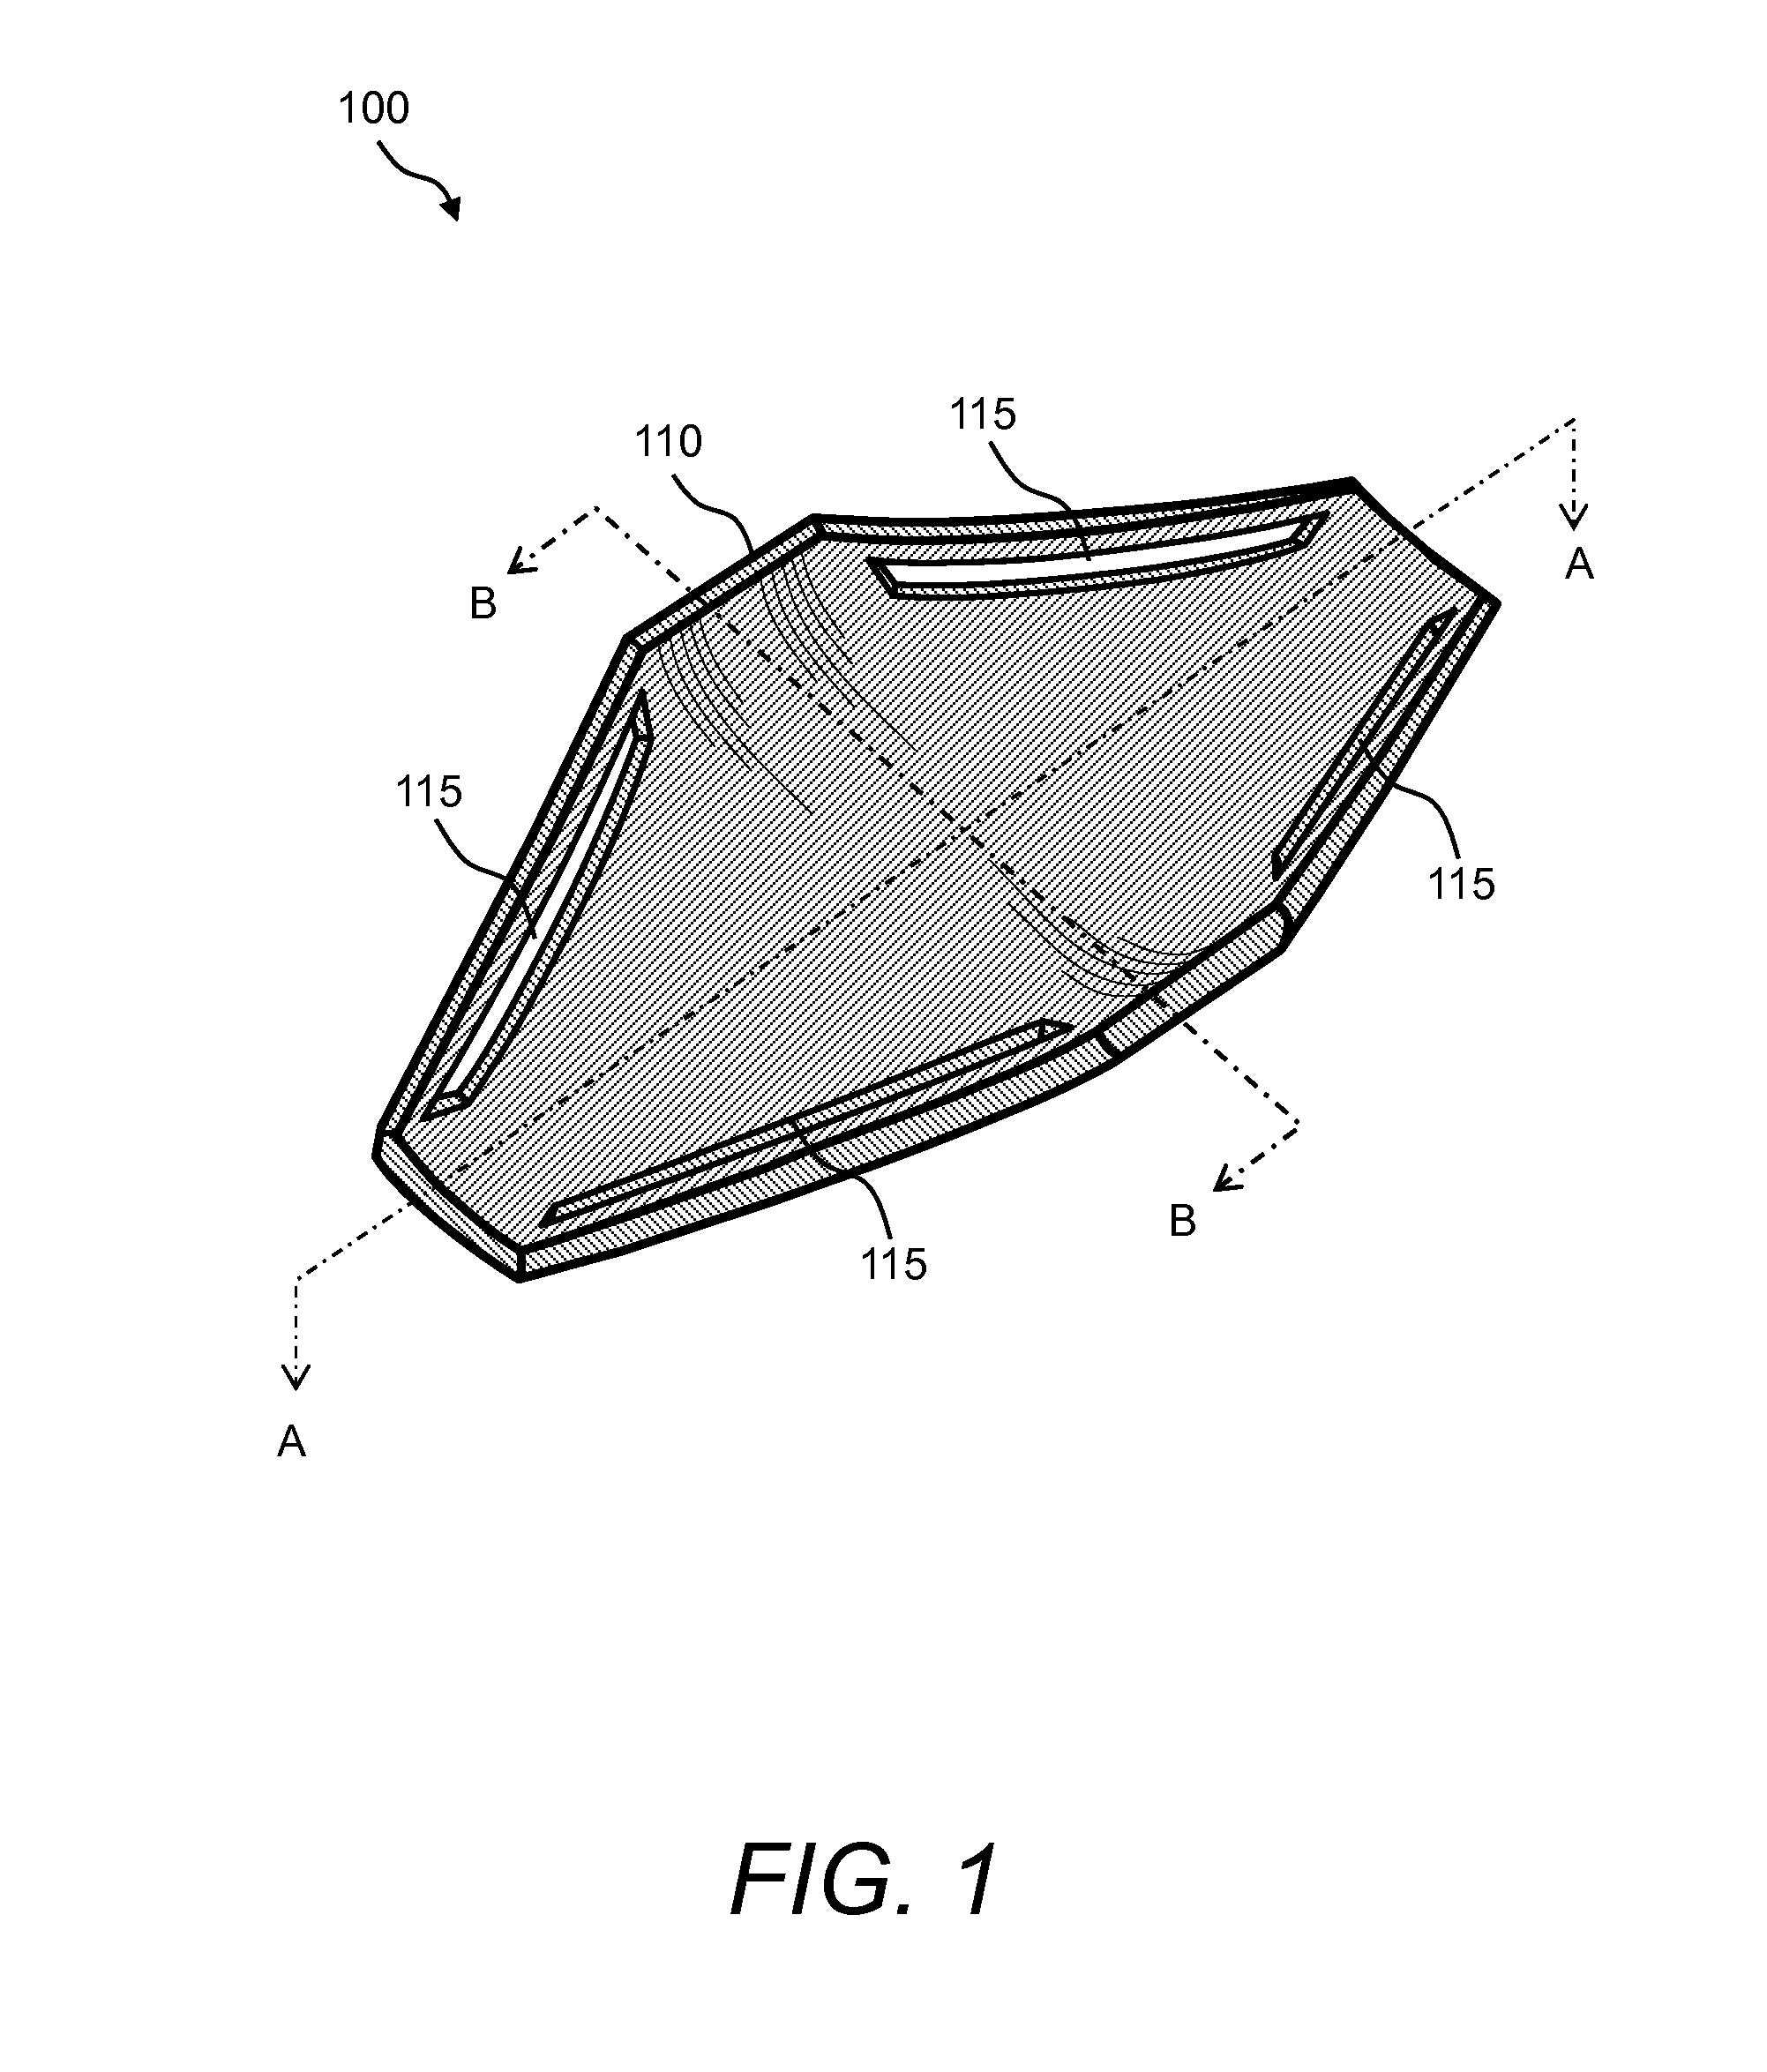 Ultrasound-detectable markers, ultrasound system, and methods for monitoring vascular flow and patency